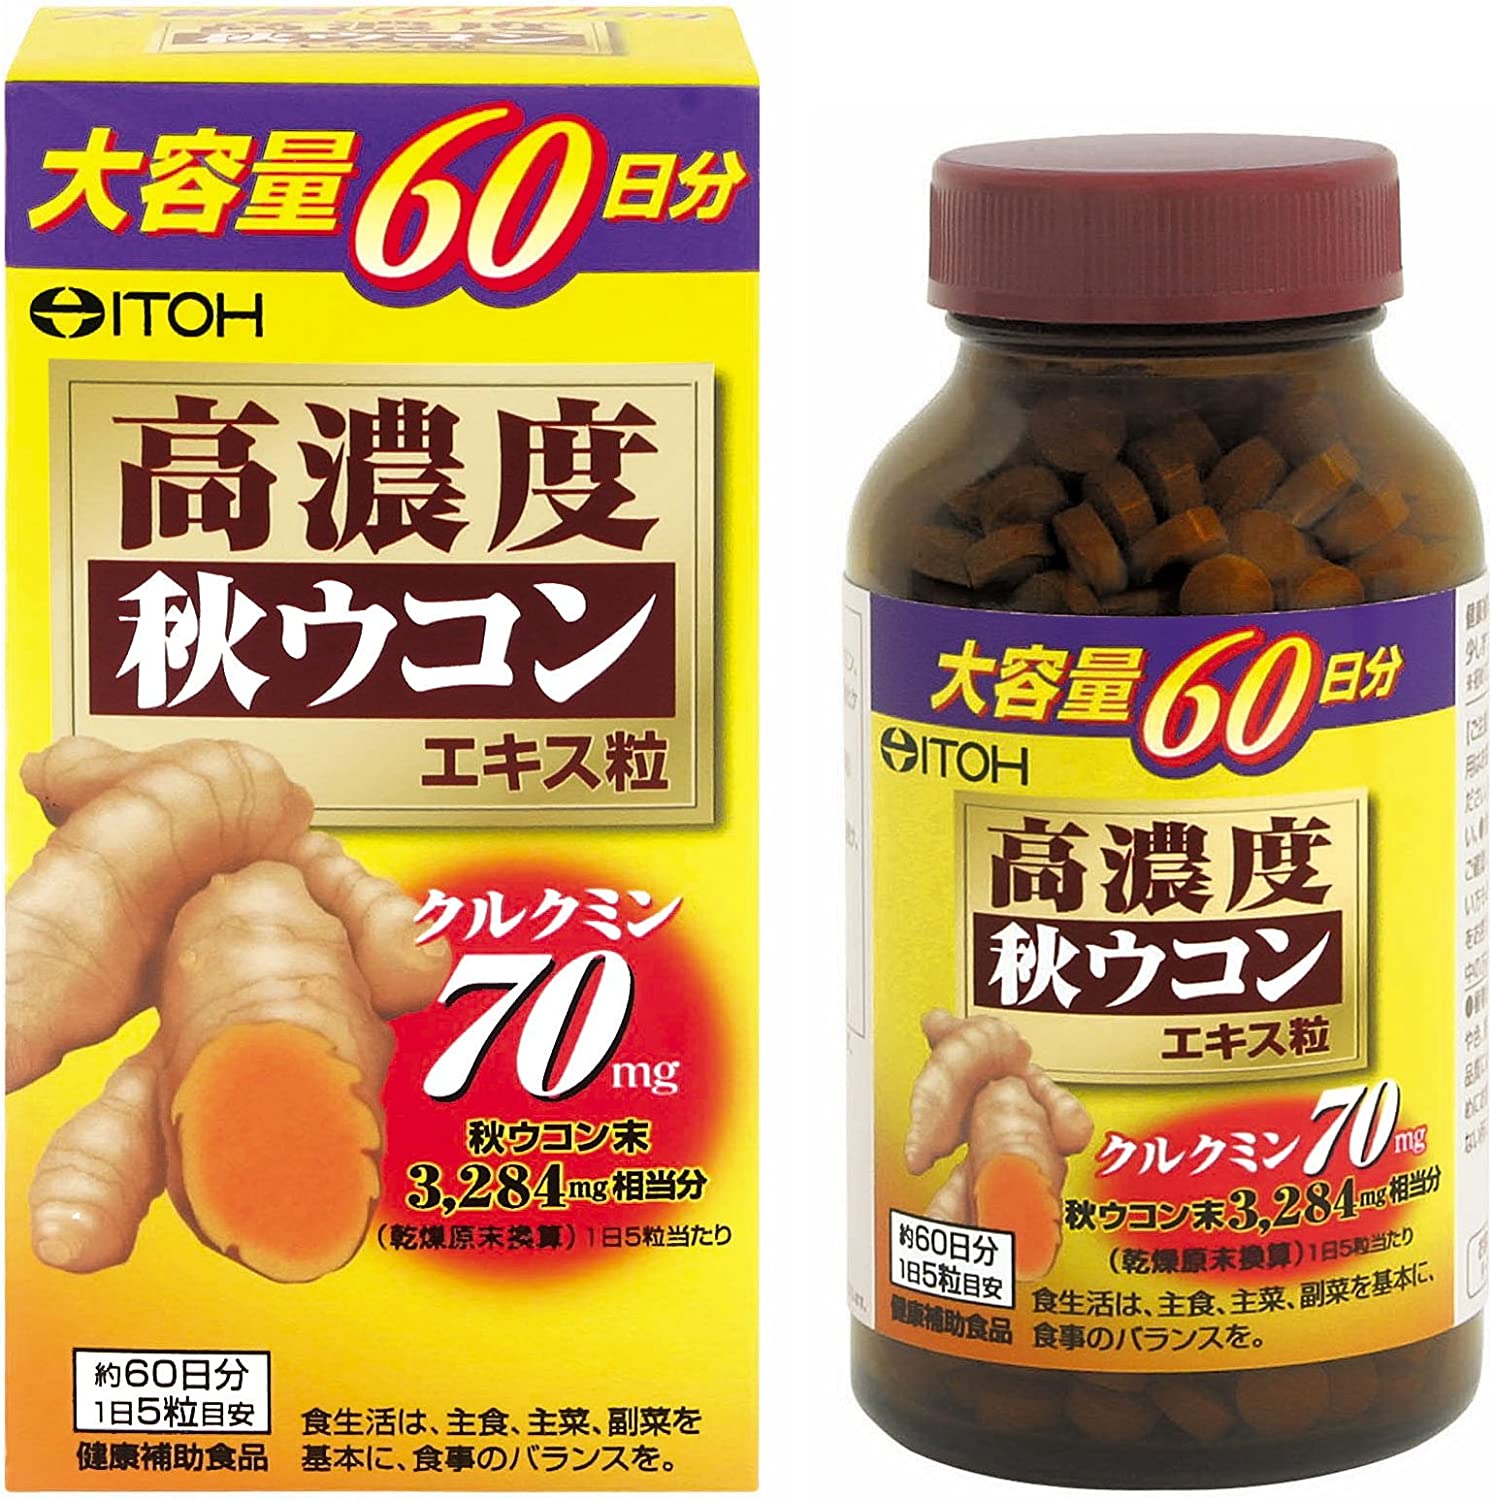 Orihiro - a complex of vitamins and minerals for adults and children